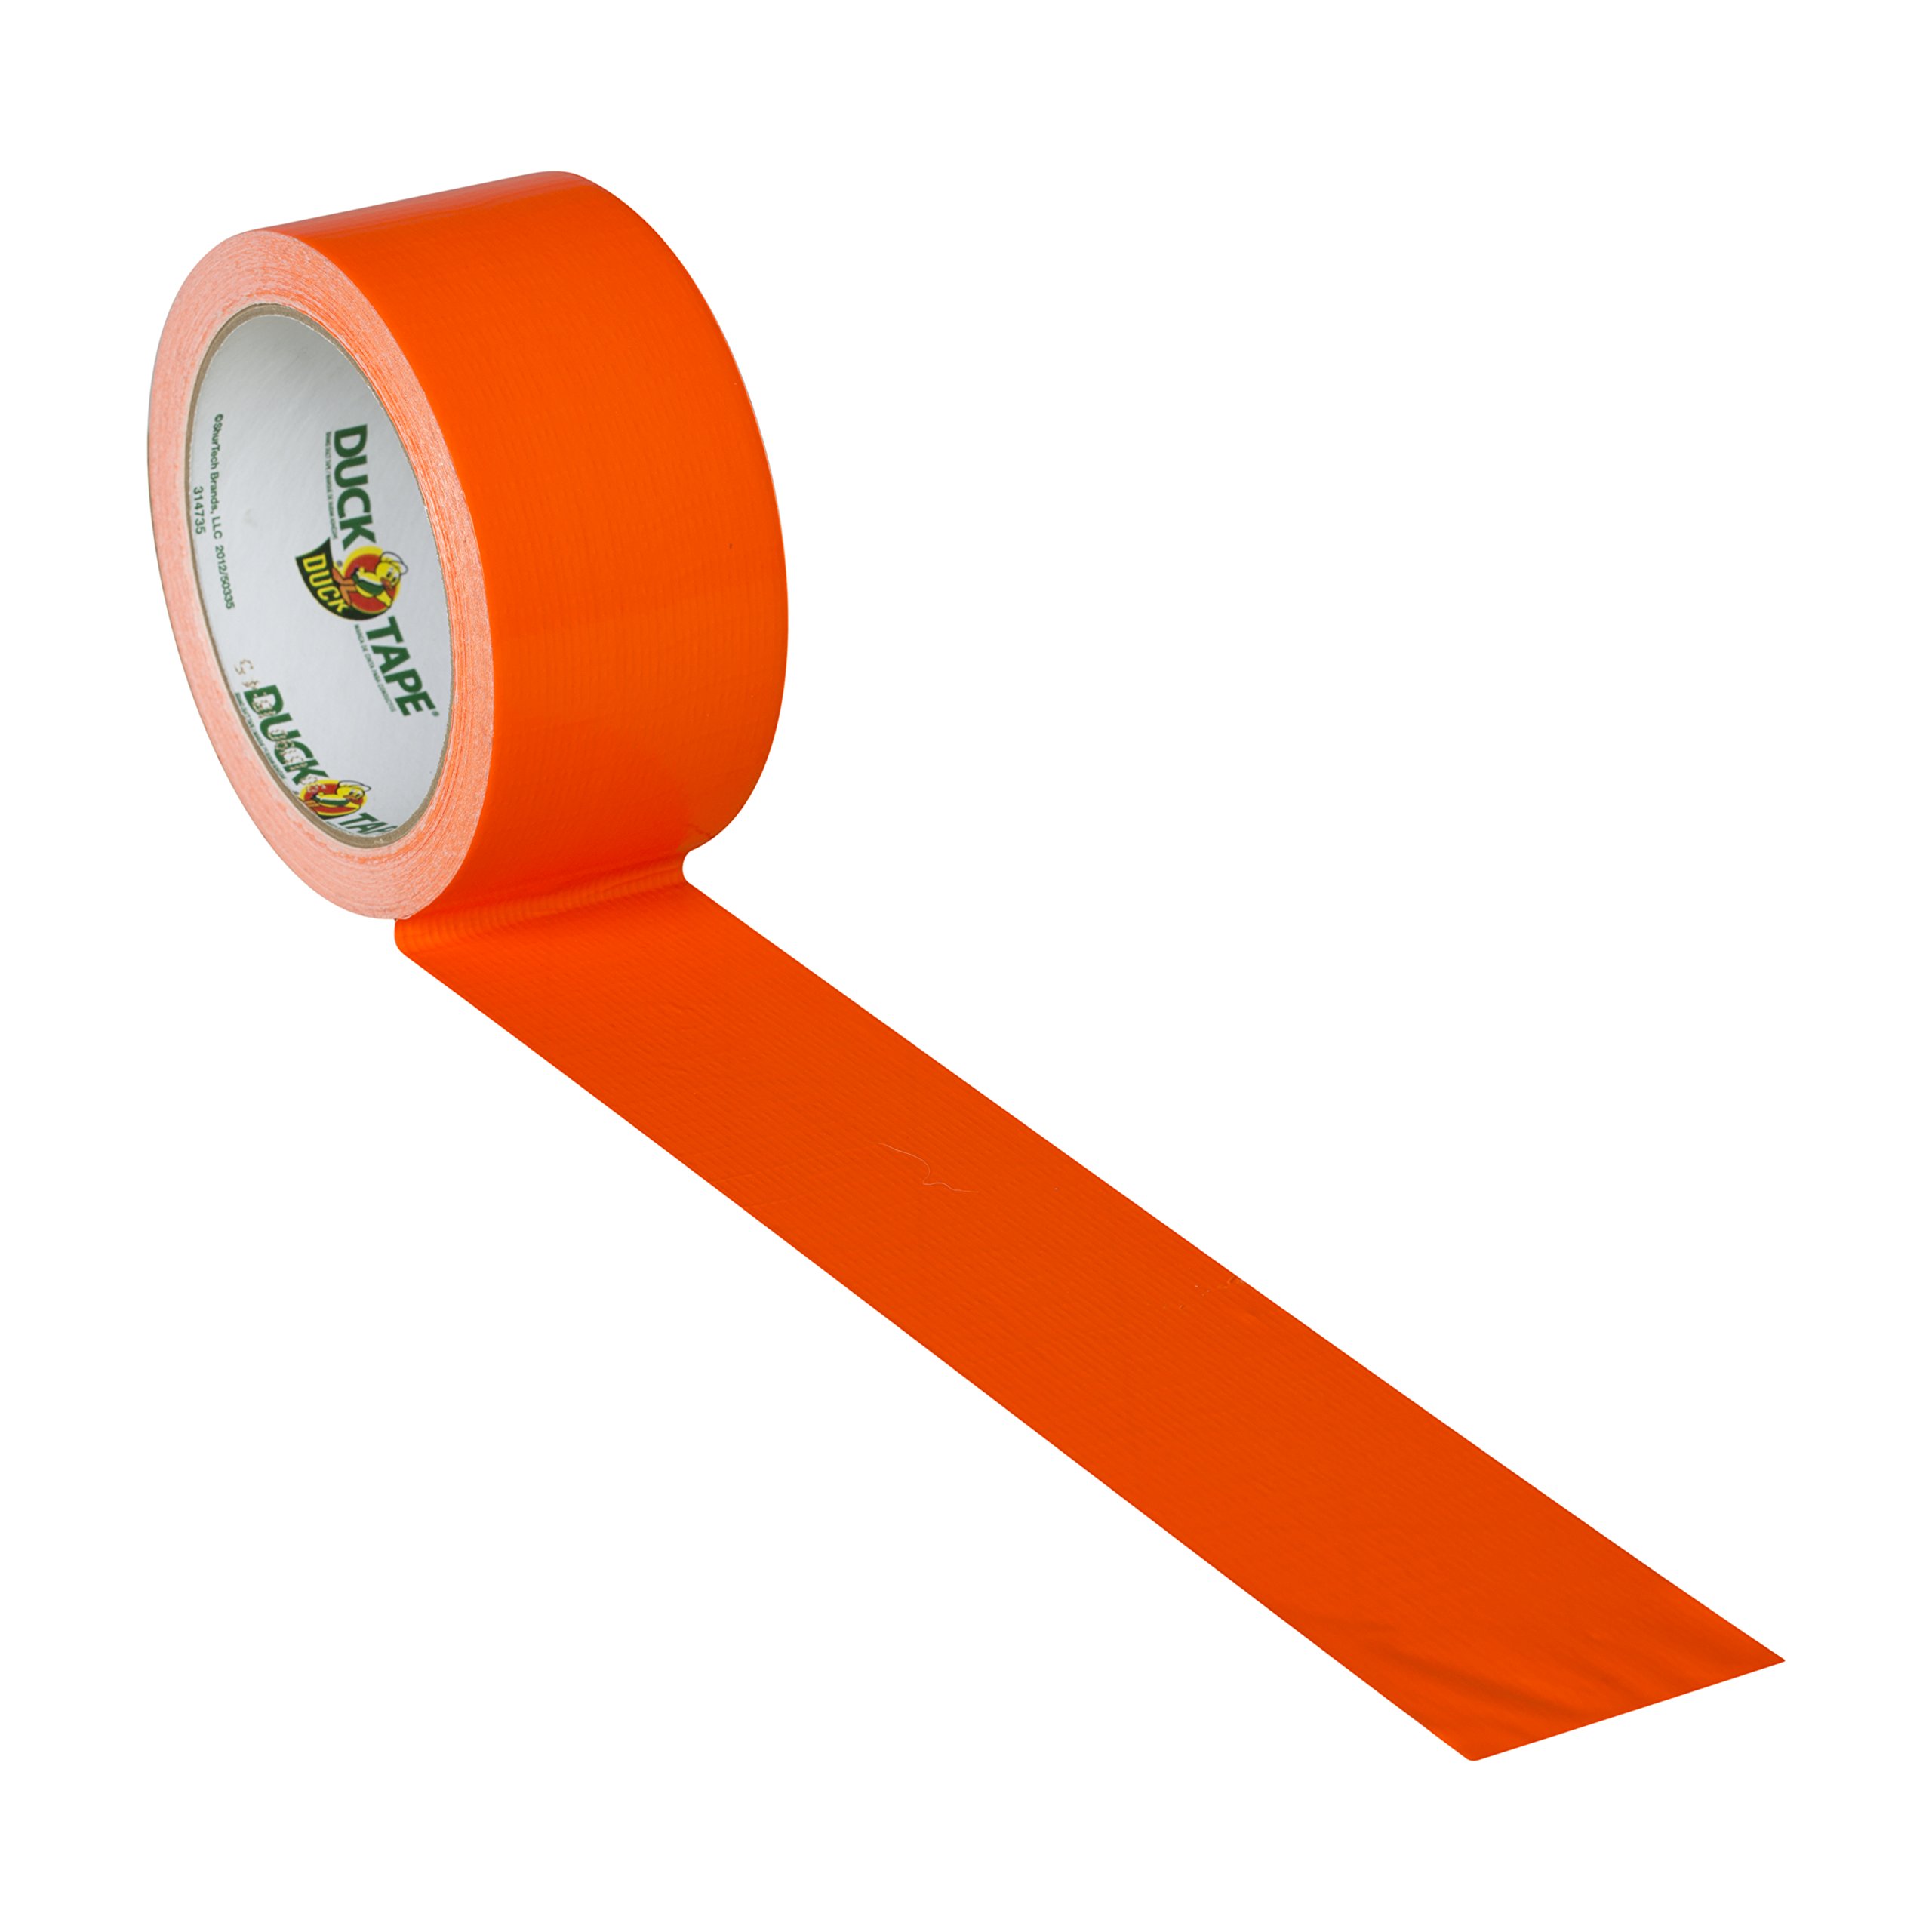 Duck Brand 1265019 Color Duct Tape, Neon Orange, 1.88 Inches x 15 Yards, Single Roll